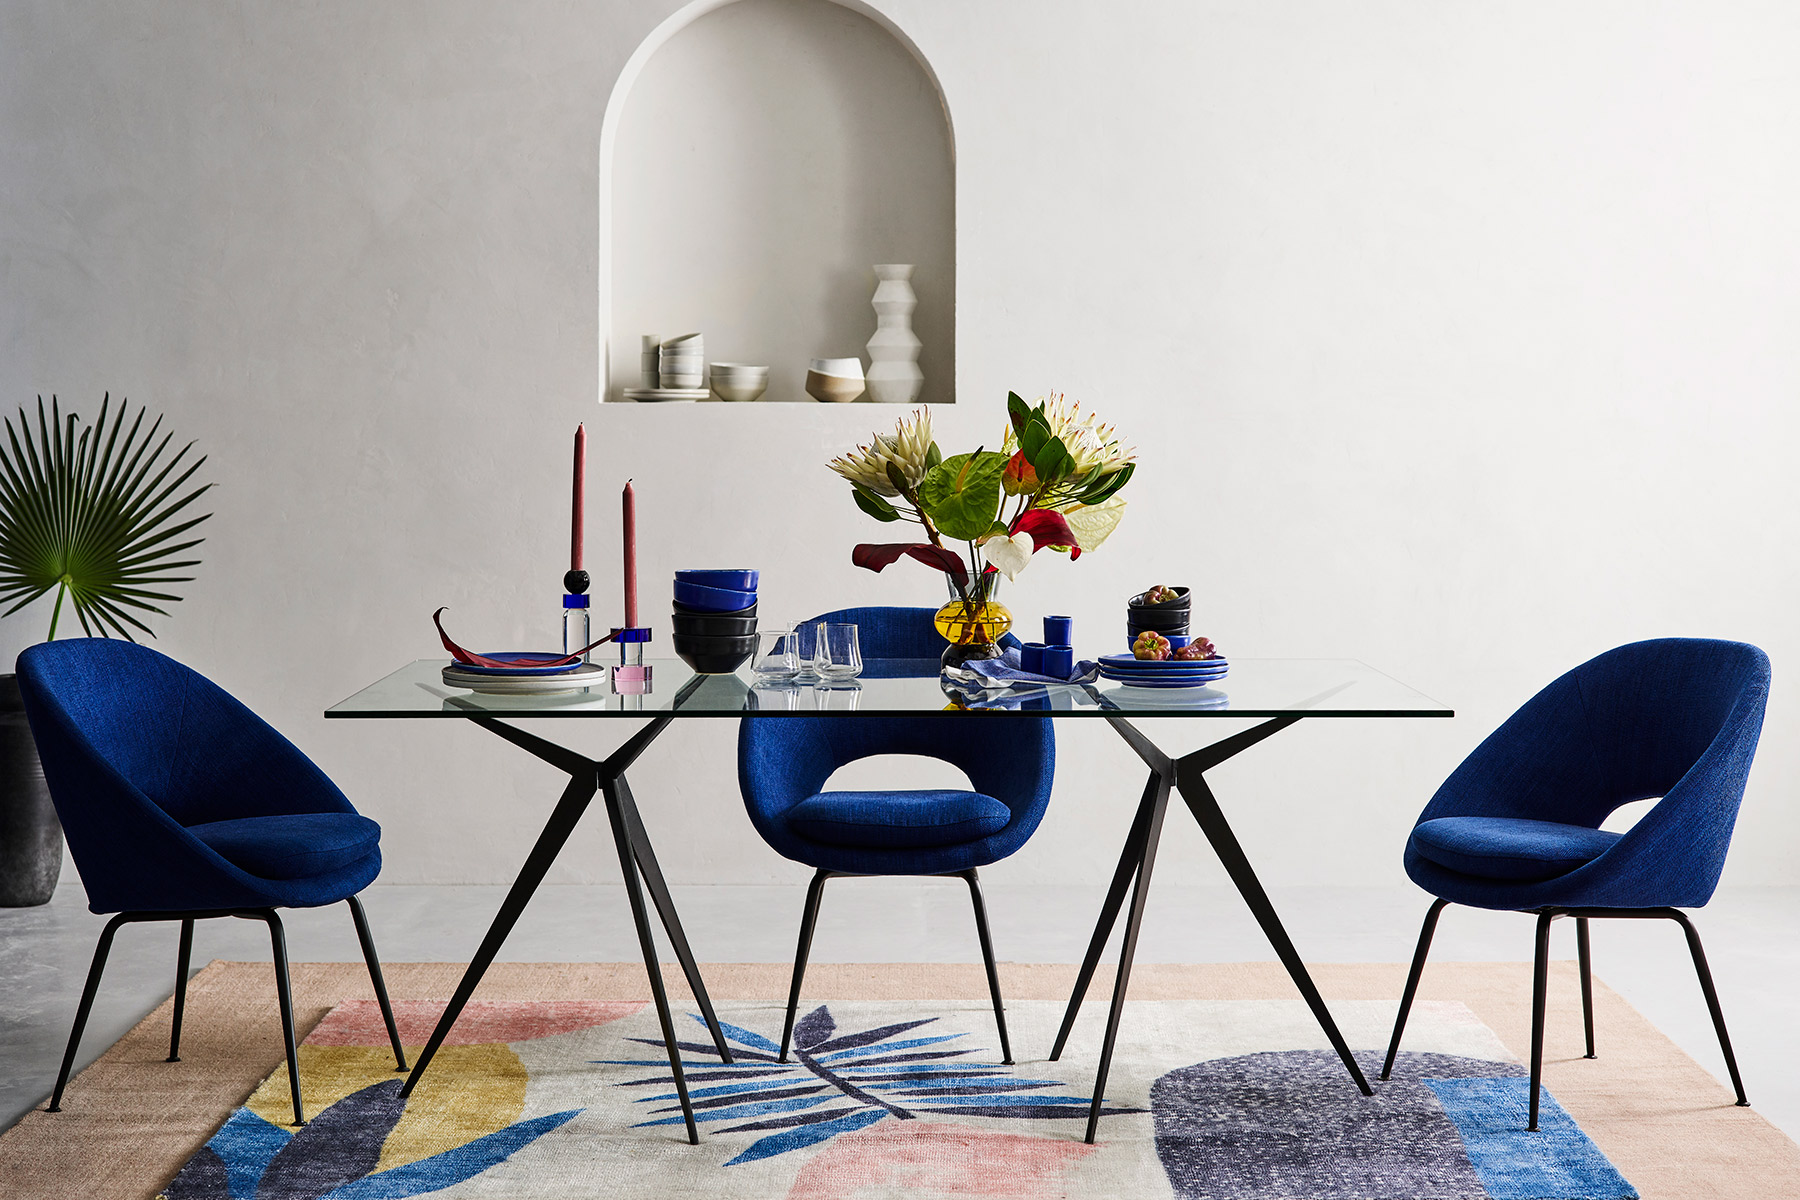 d4-homepage-statement-dining-table-sp19_7734